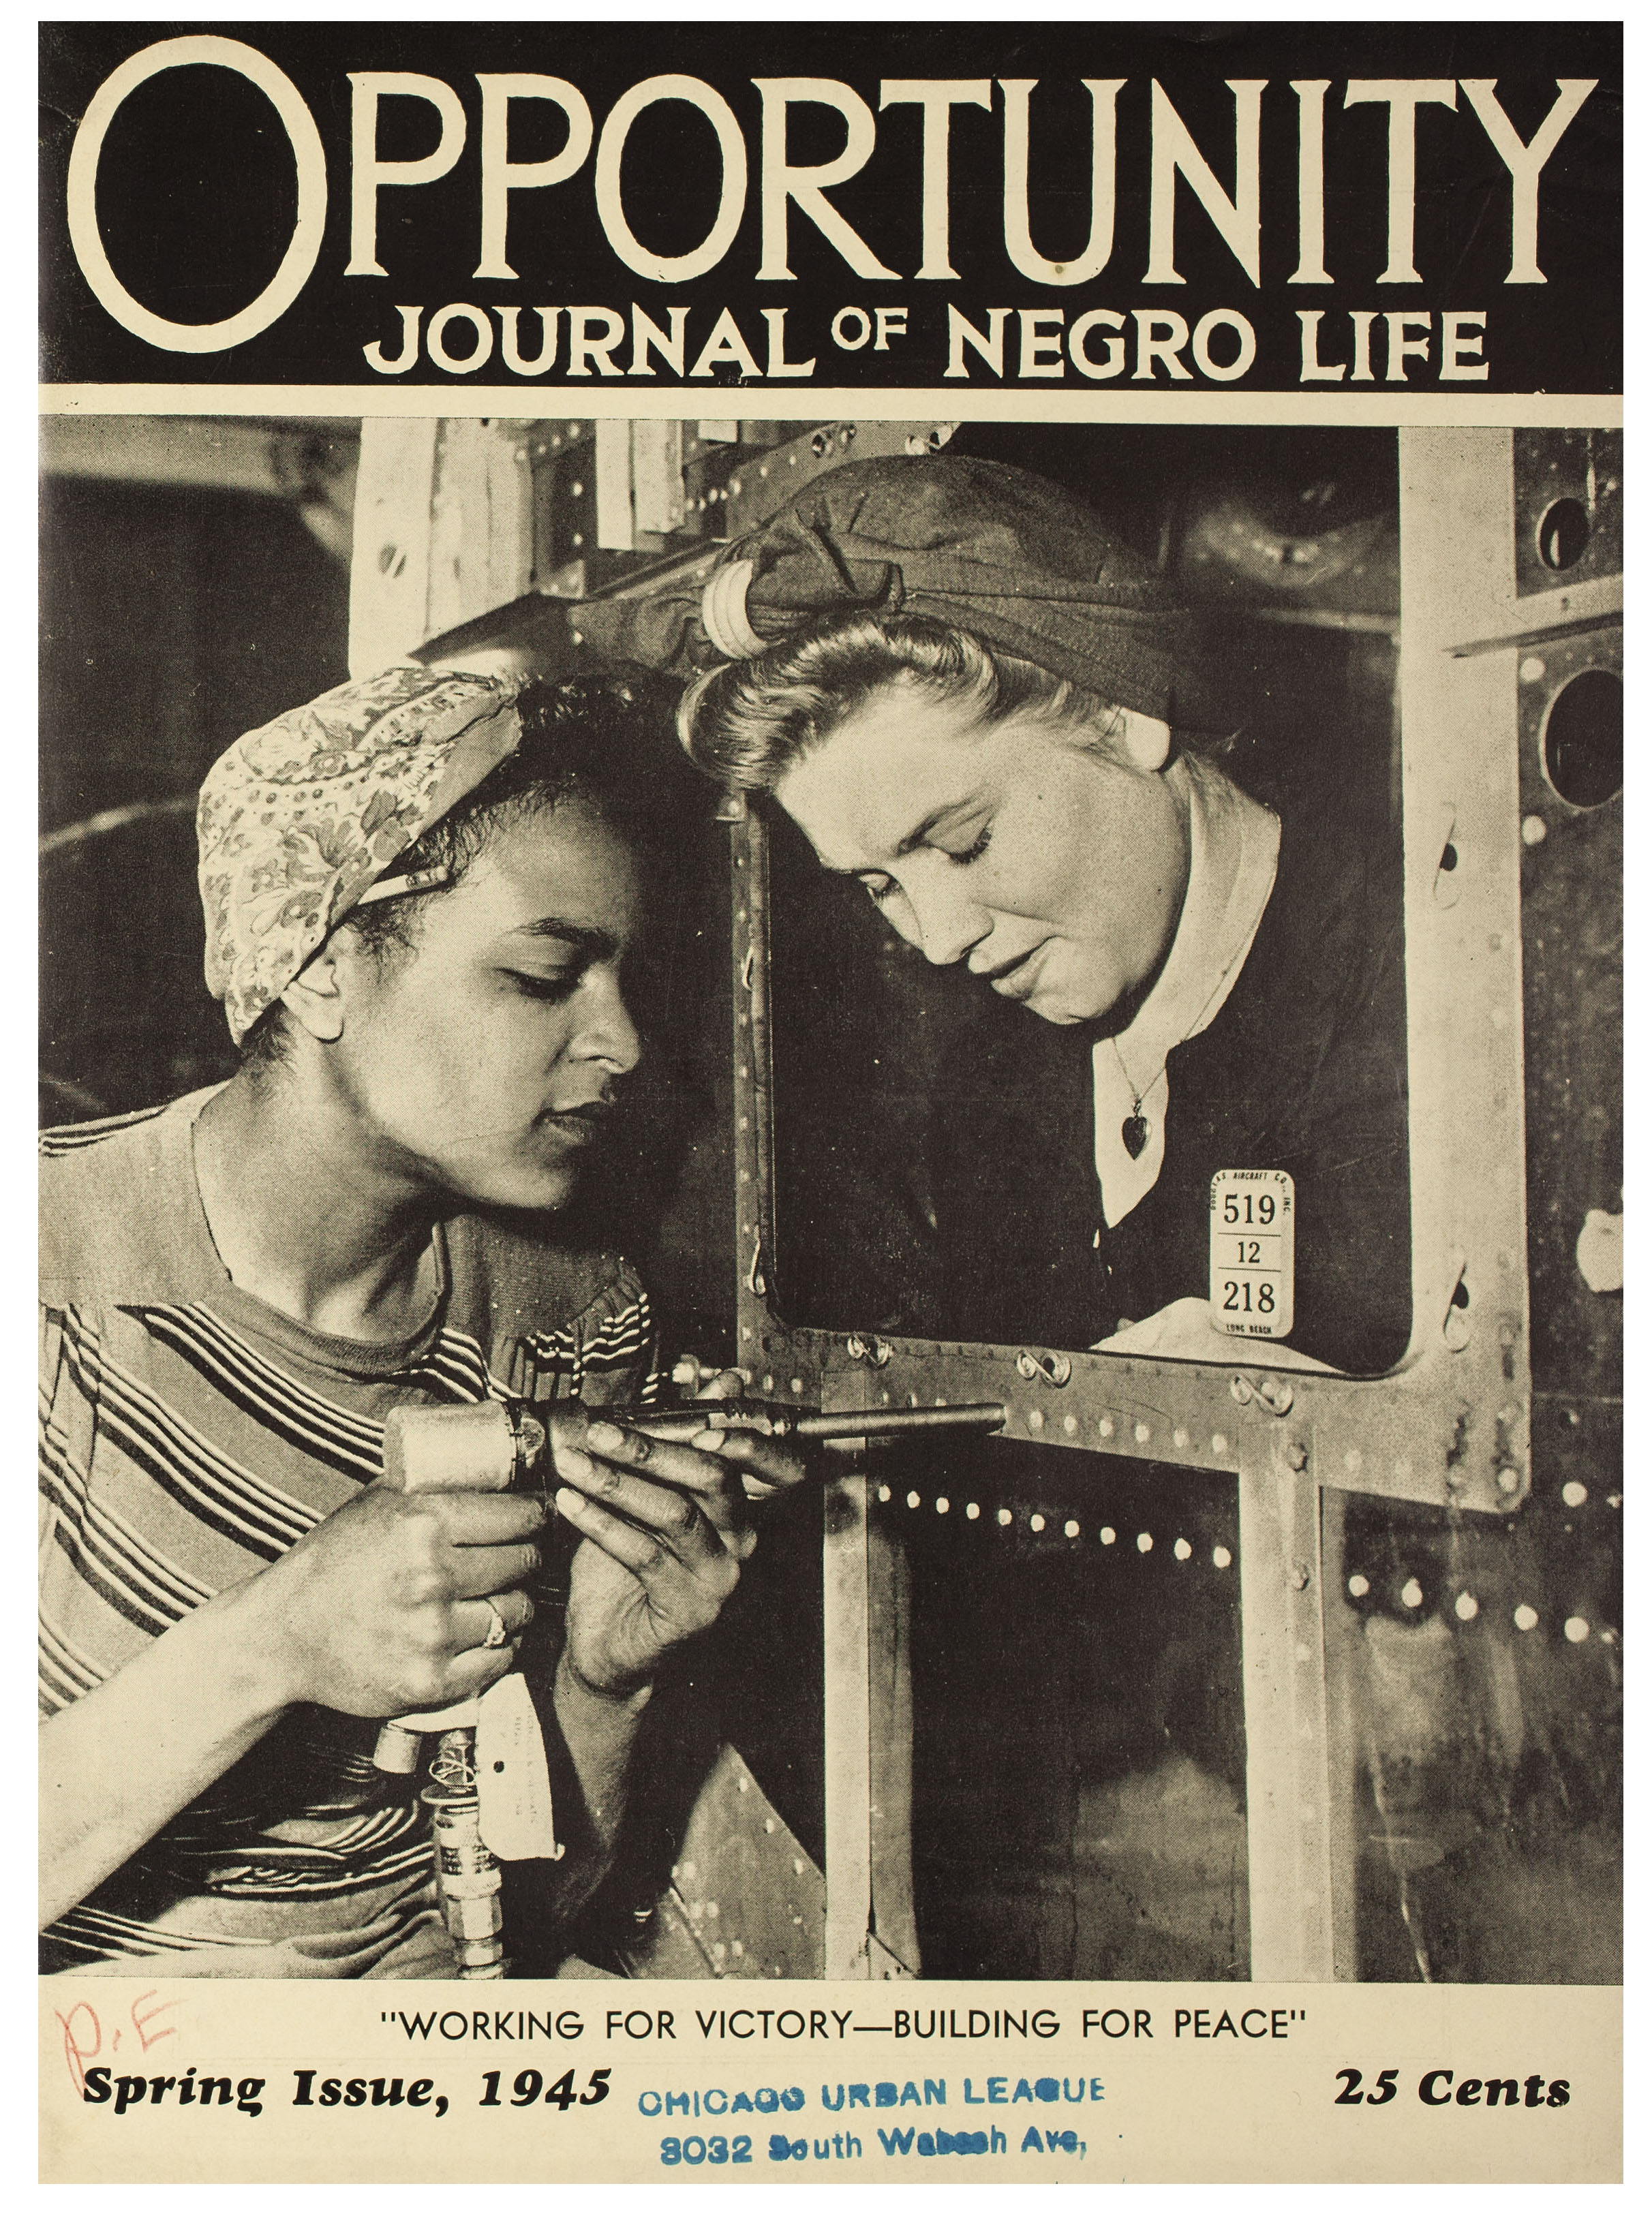 Opportunity Journal of Negro Life